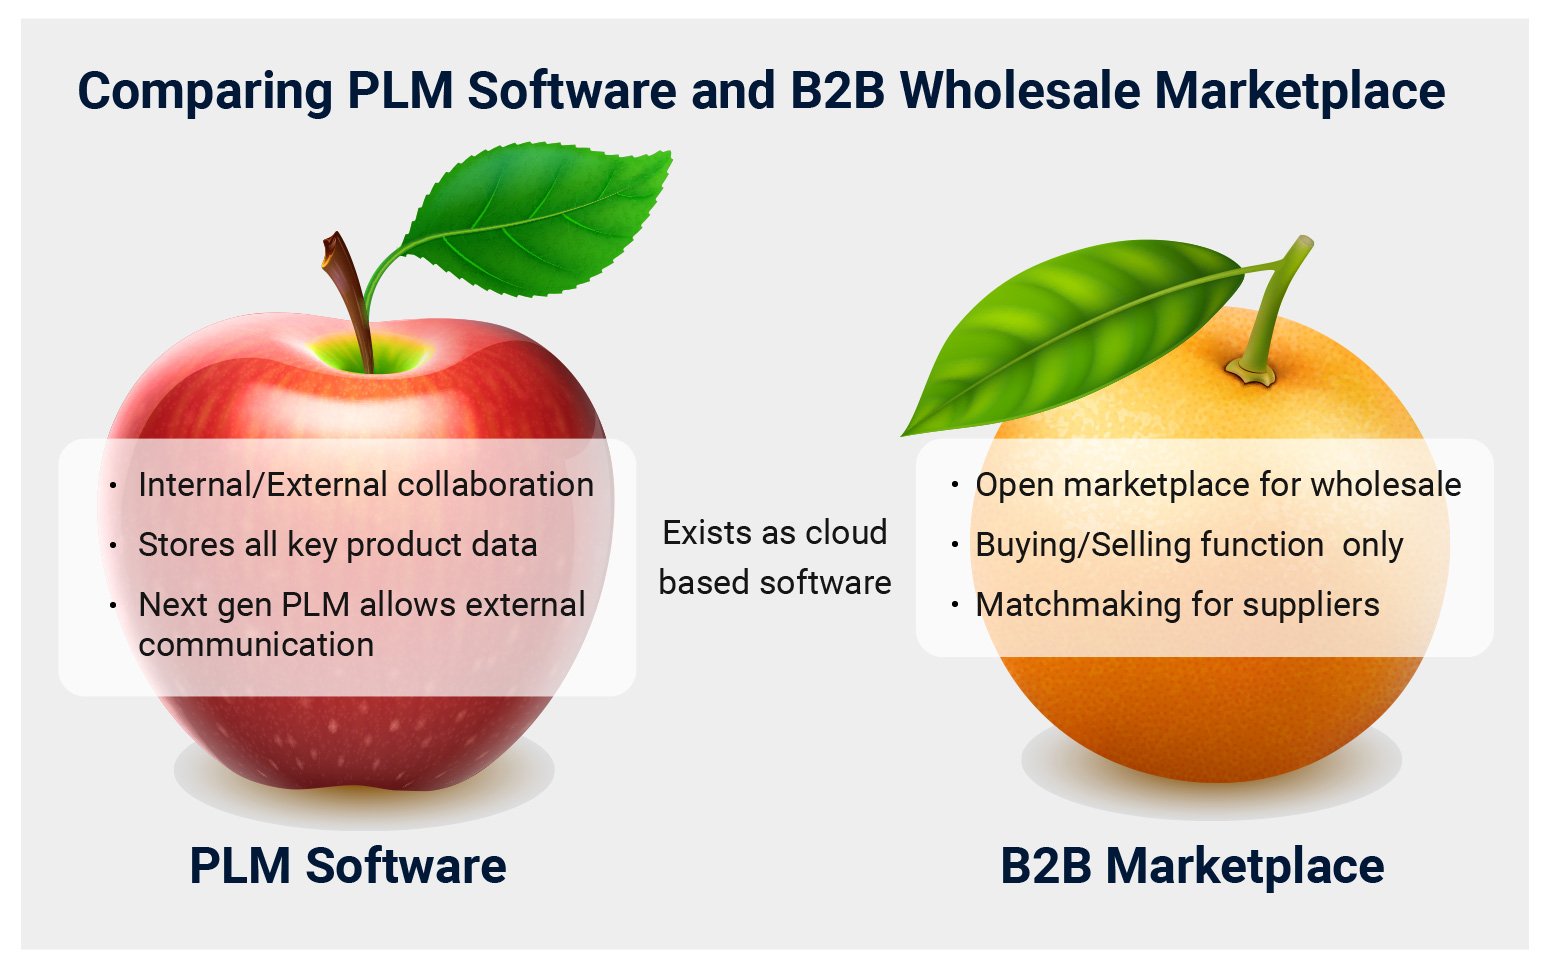 PLM software and B2B marketplaces are superimposed onto an apply and orange to demonstrate the difference. 